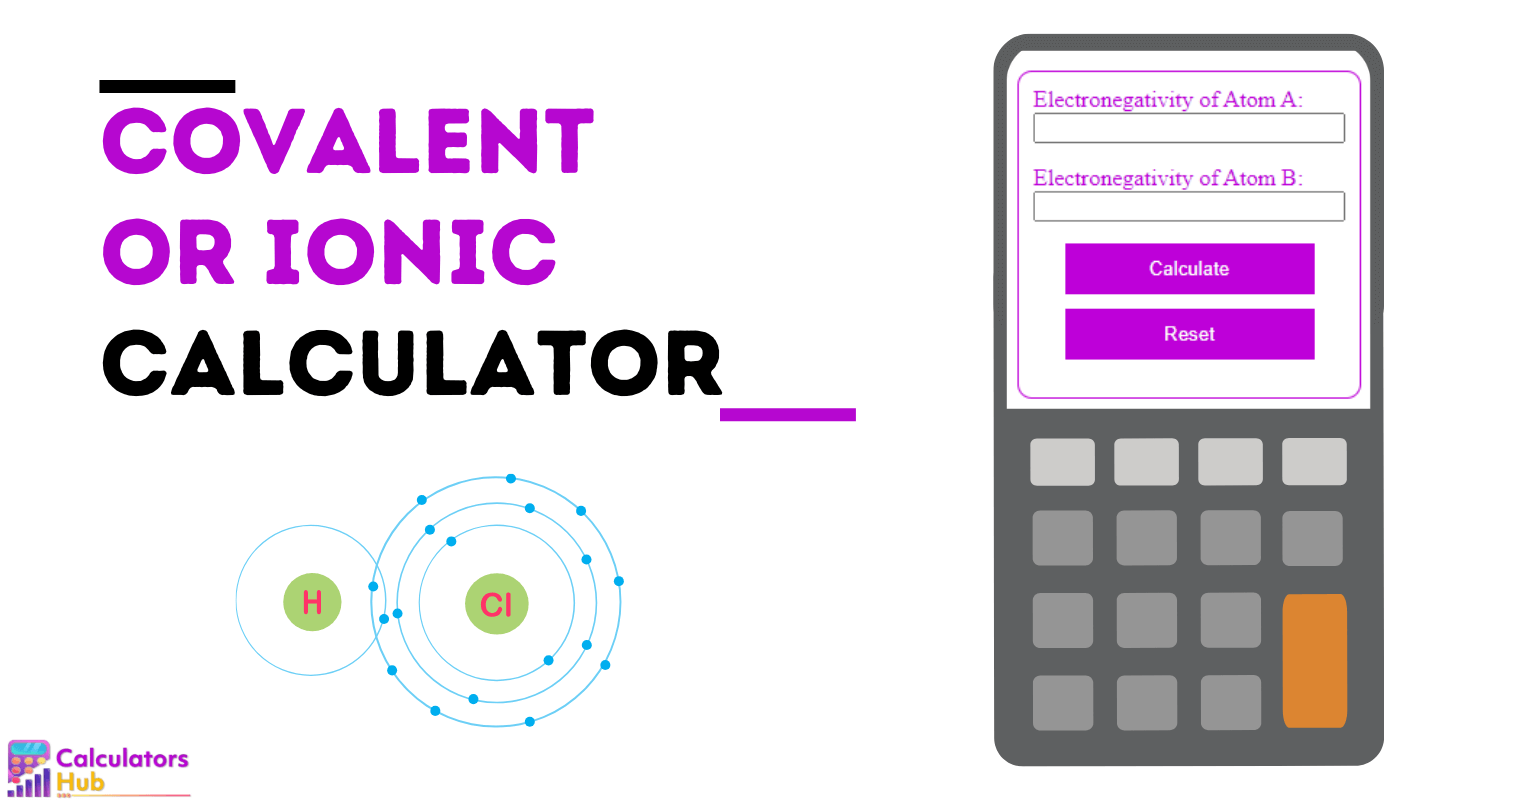 Covalent or Ionic Calculator